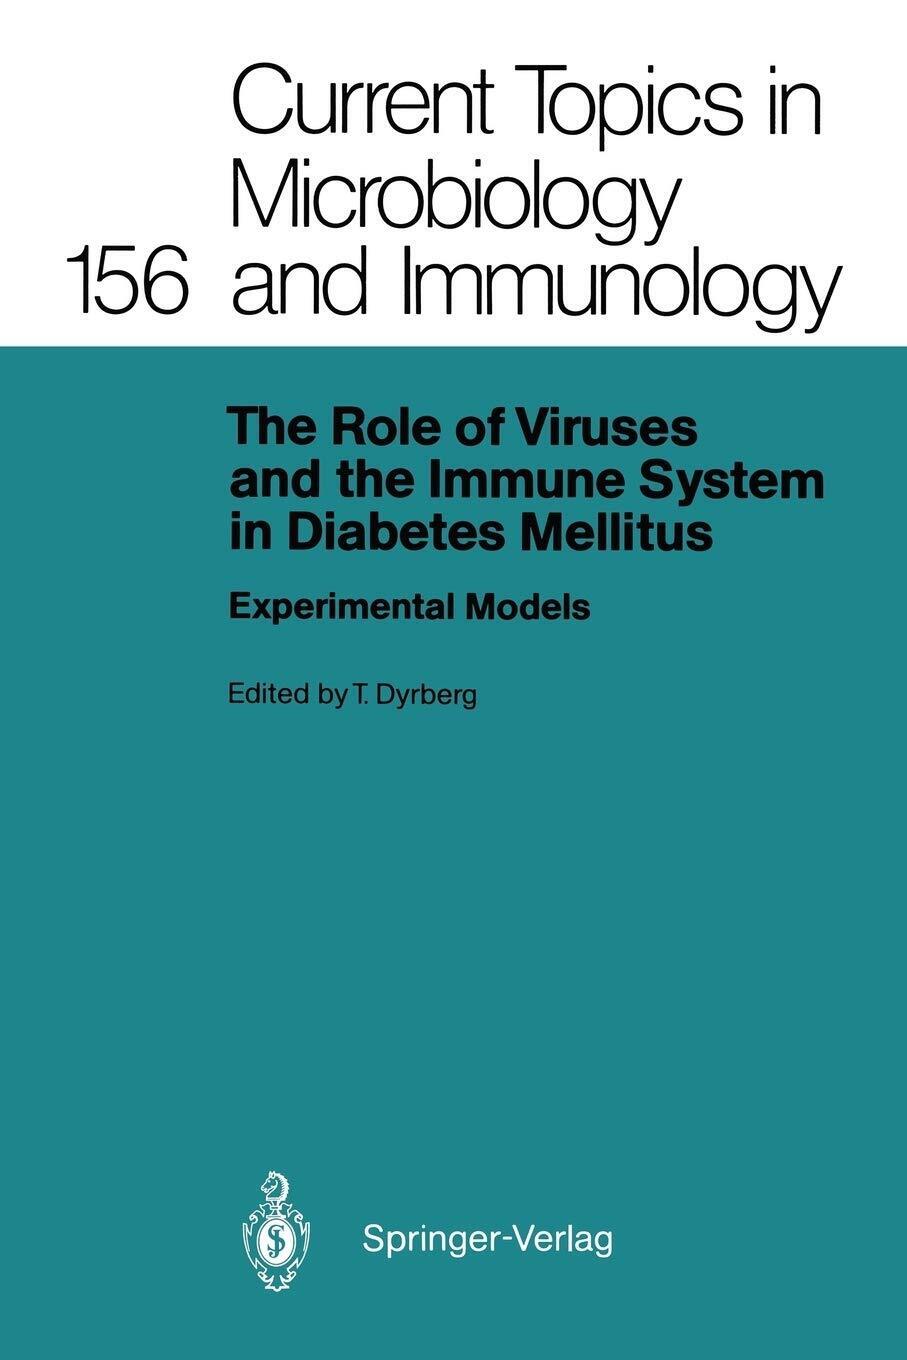 The Role of Viruses and the Immune System in Diabetes Mellitus - Springer, 2011